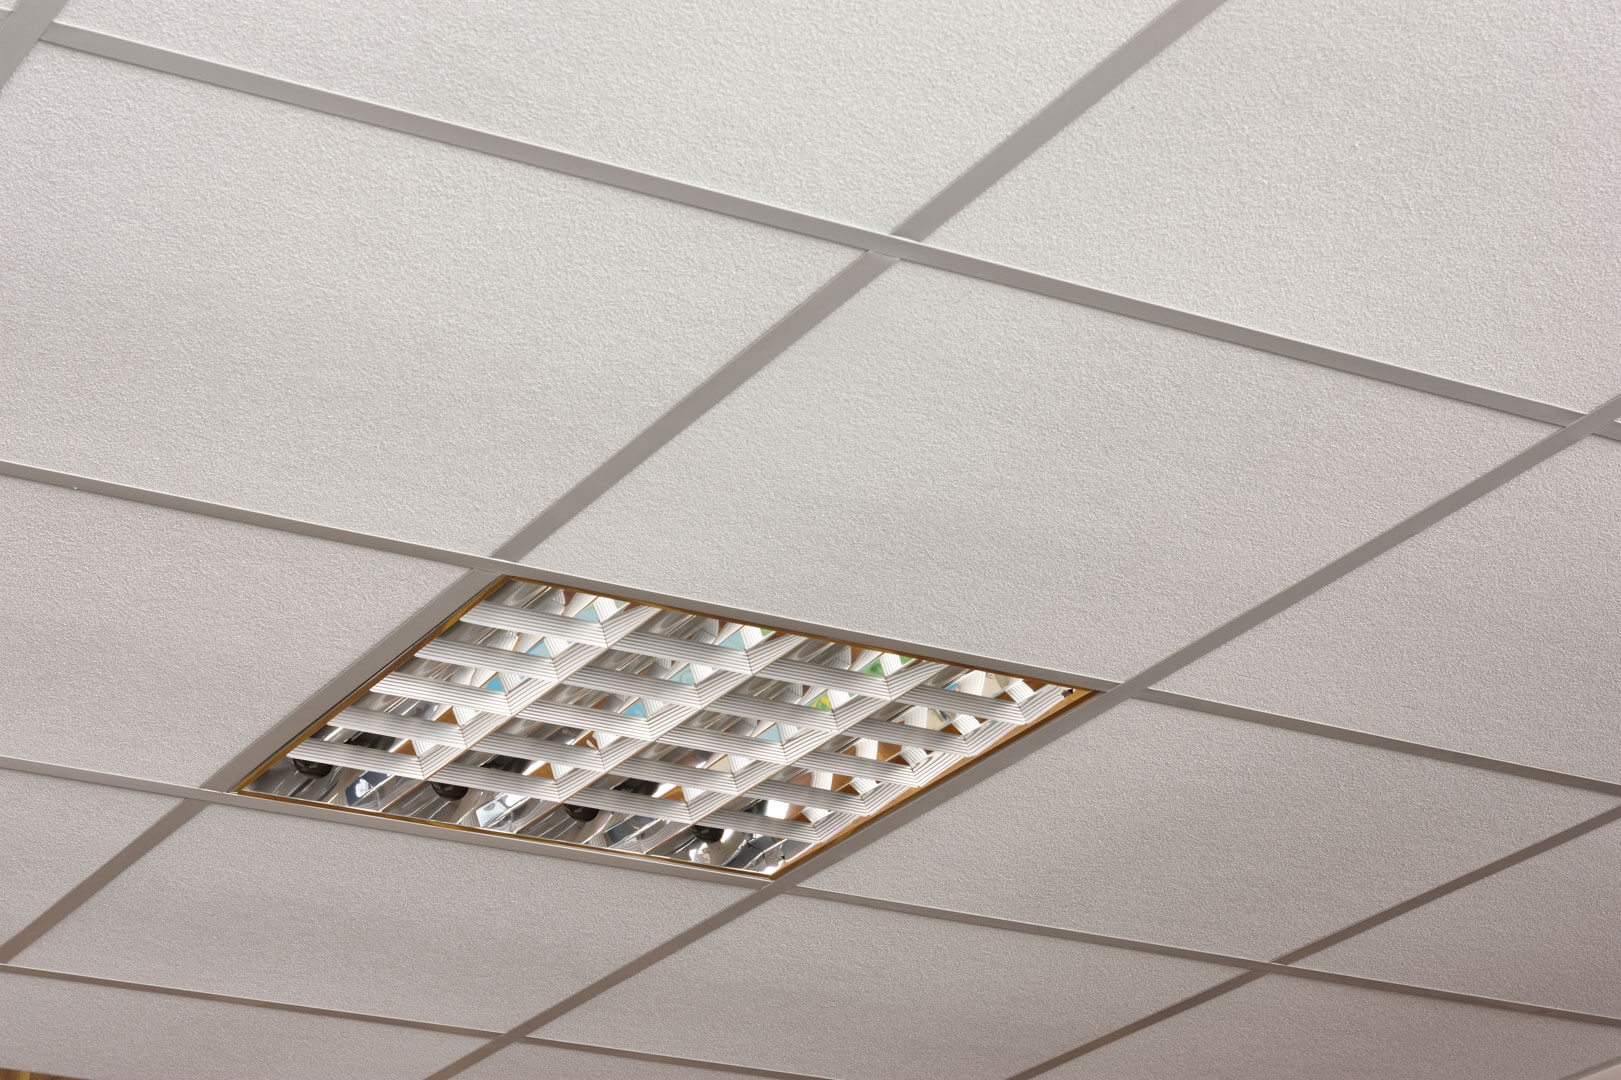 Armstrong Ceiling Tiles Material Armstrong Ceiling Tiles Material ceiling tiles lights accessories a leading uk supplier of 1621 X 1080